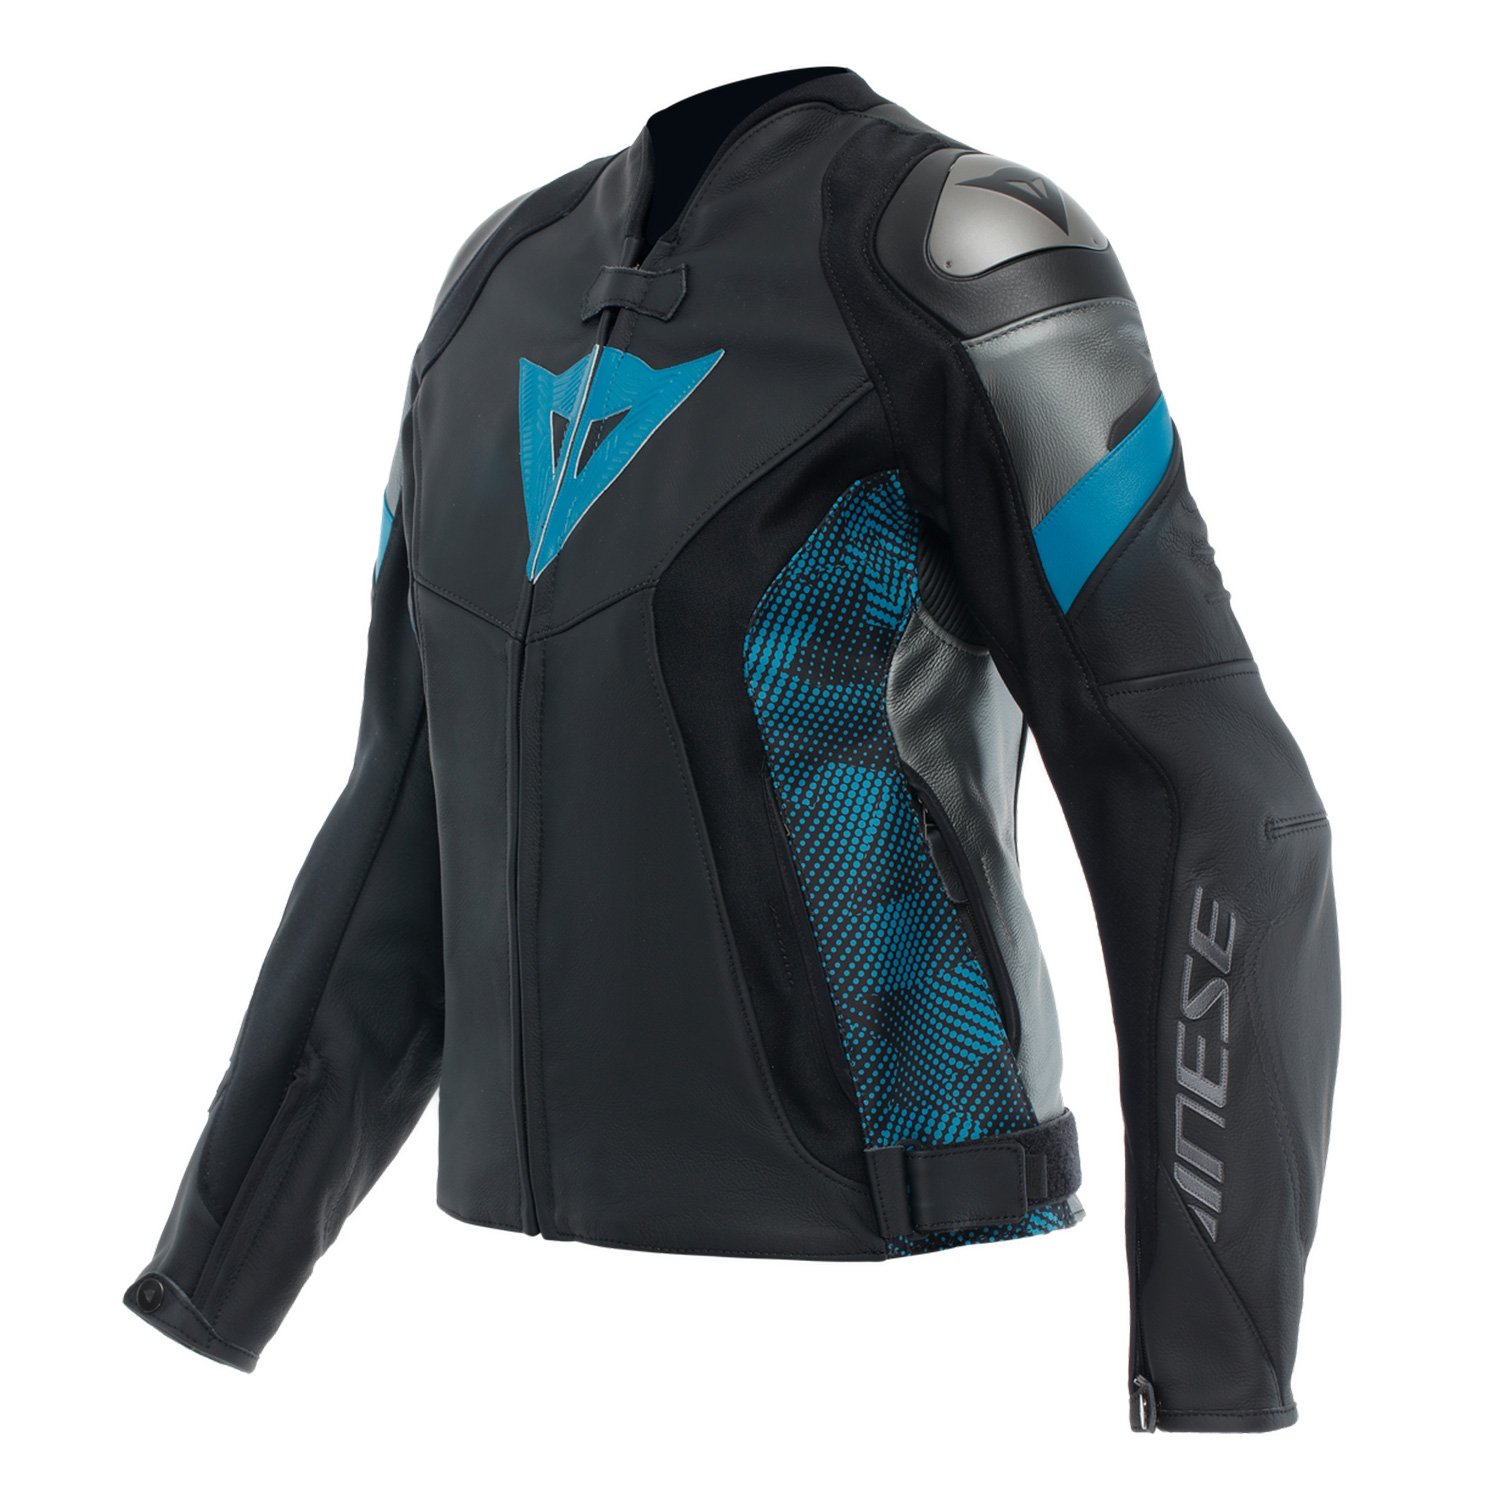 Image of Dainese Avro 5 Leather Jacket WMN Black Teal Anthracite Size 52 EN